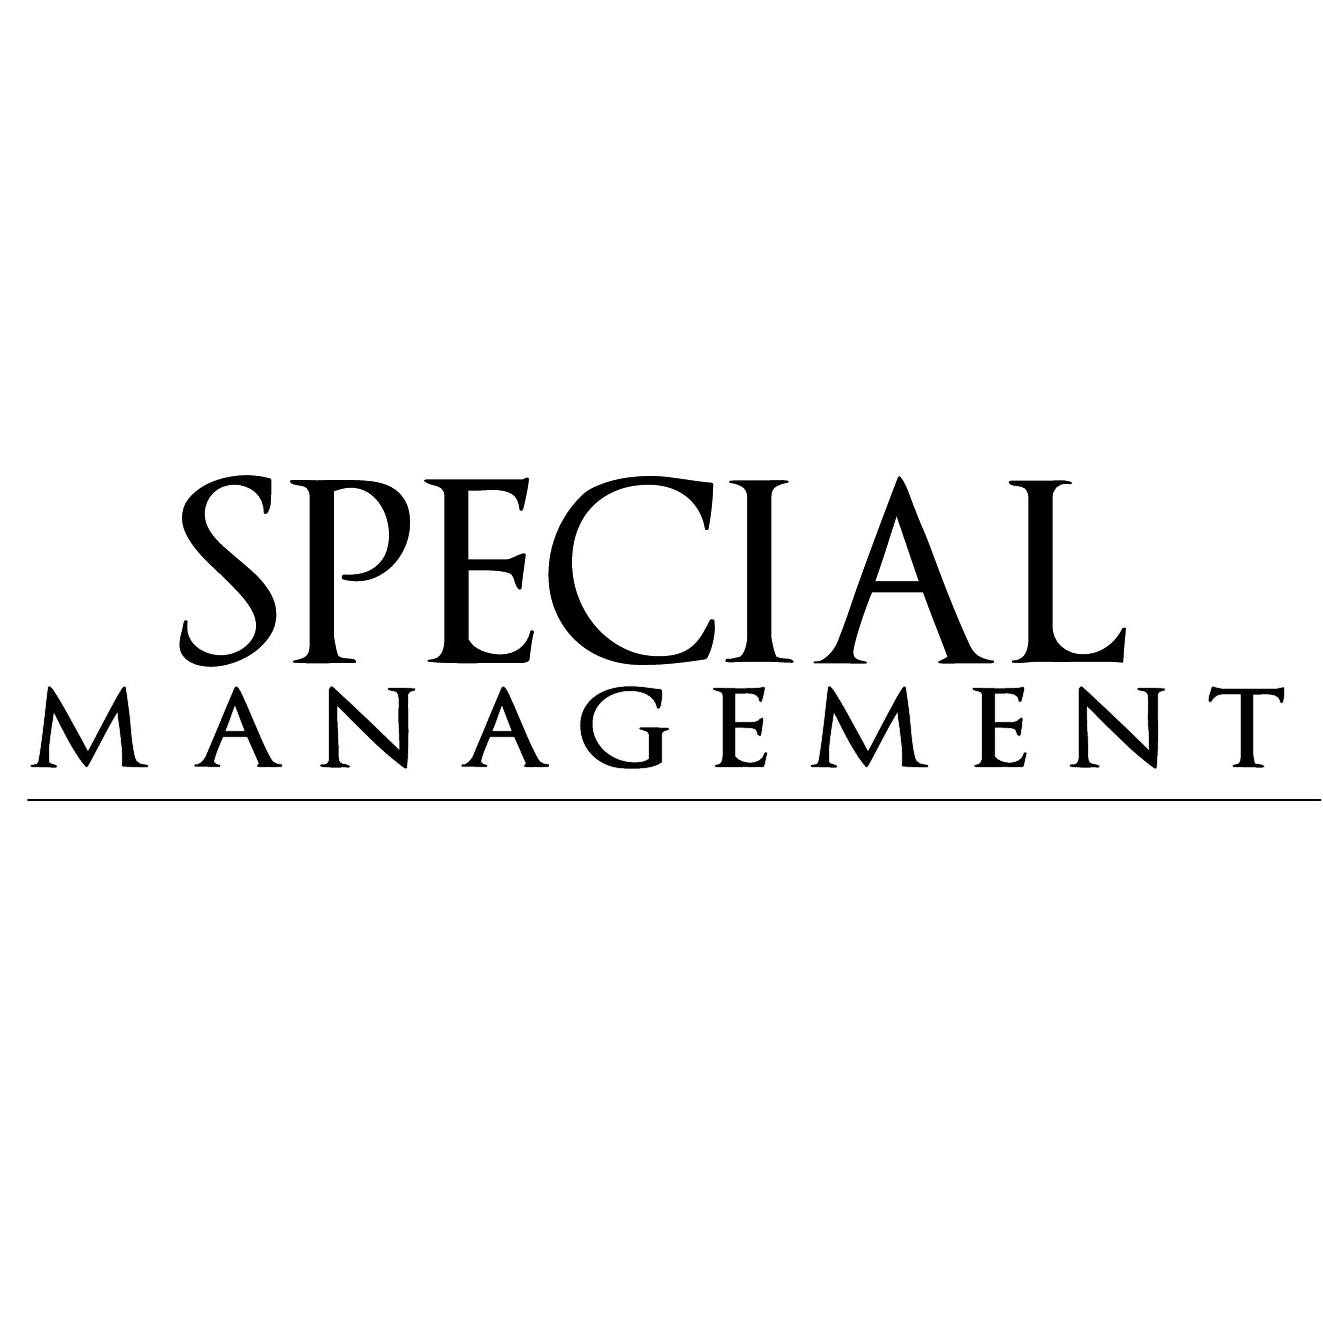 Special Management